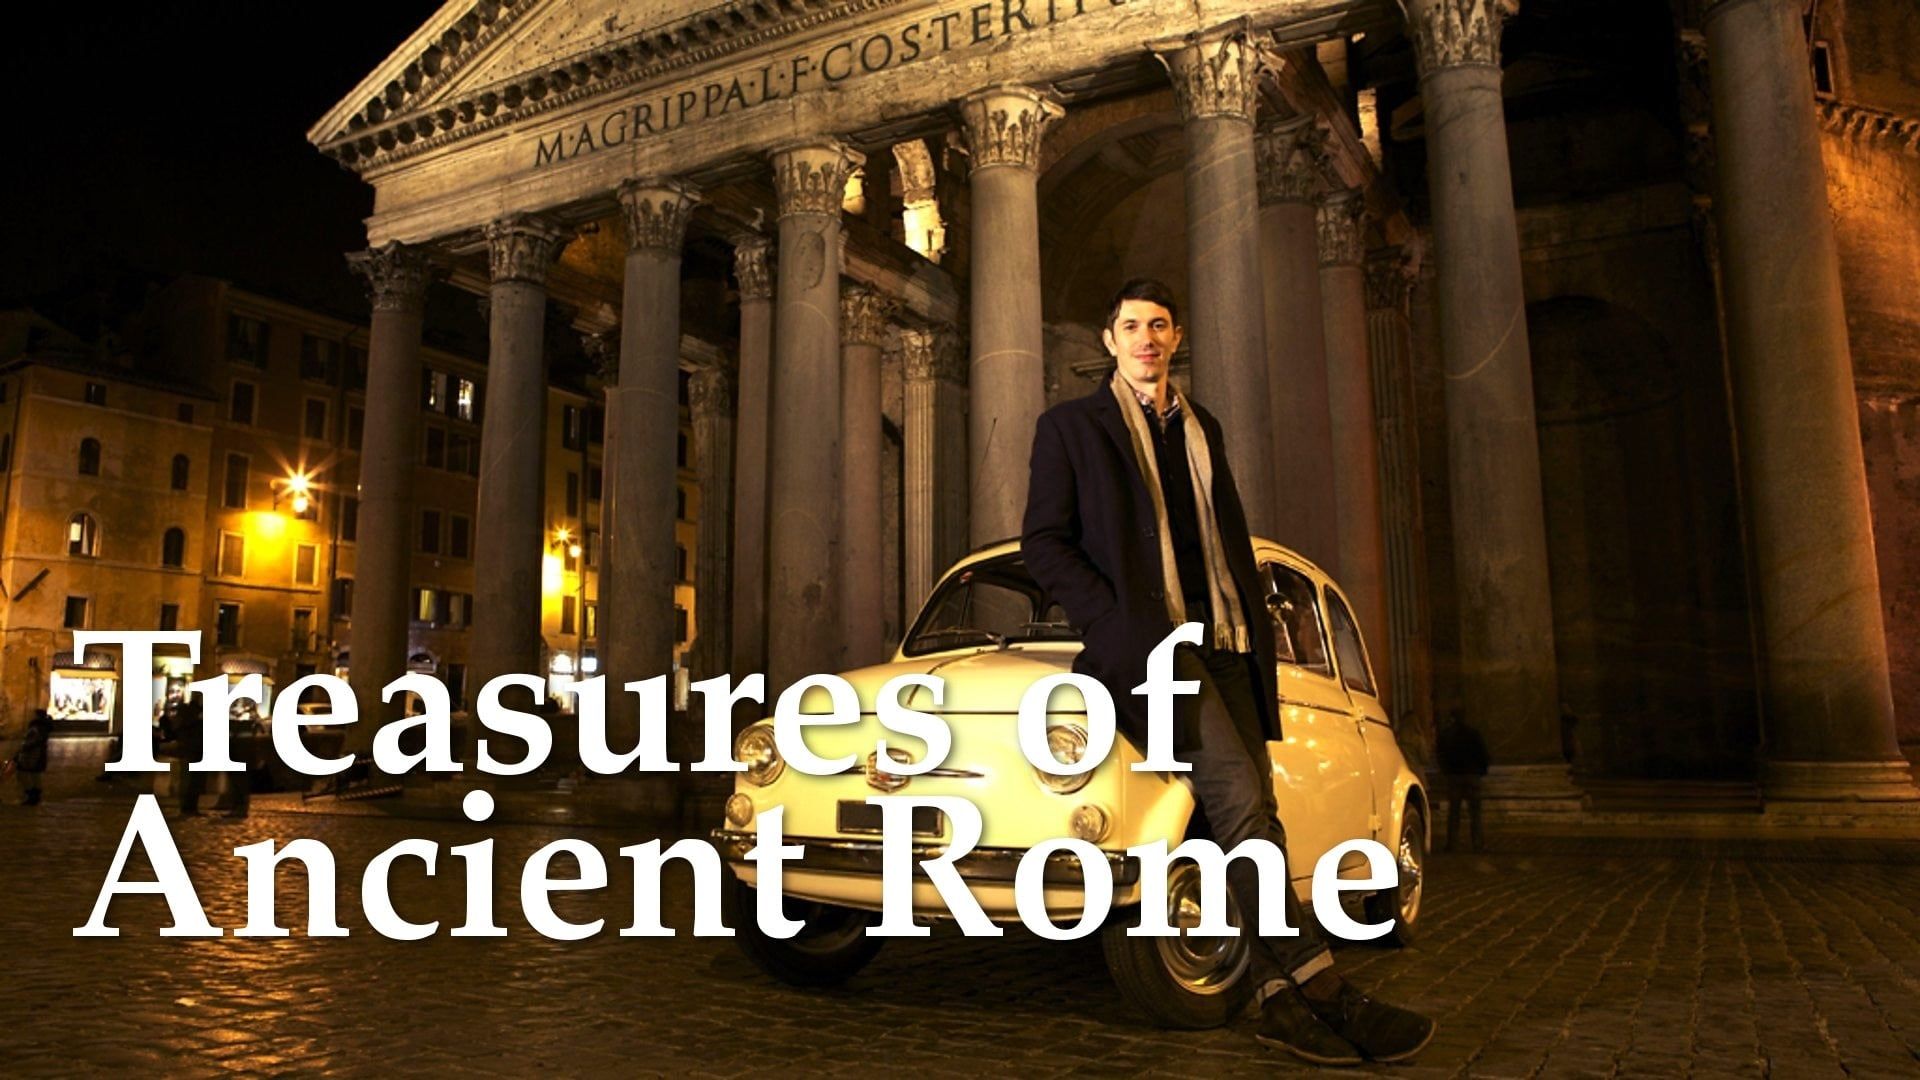 Treasures of Ancient Rome background